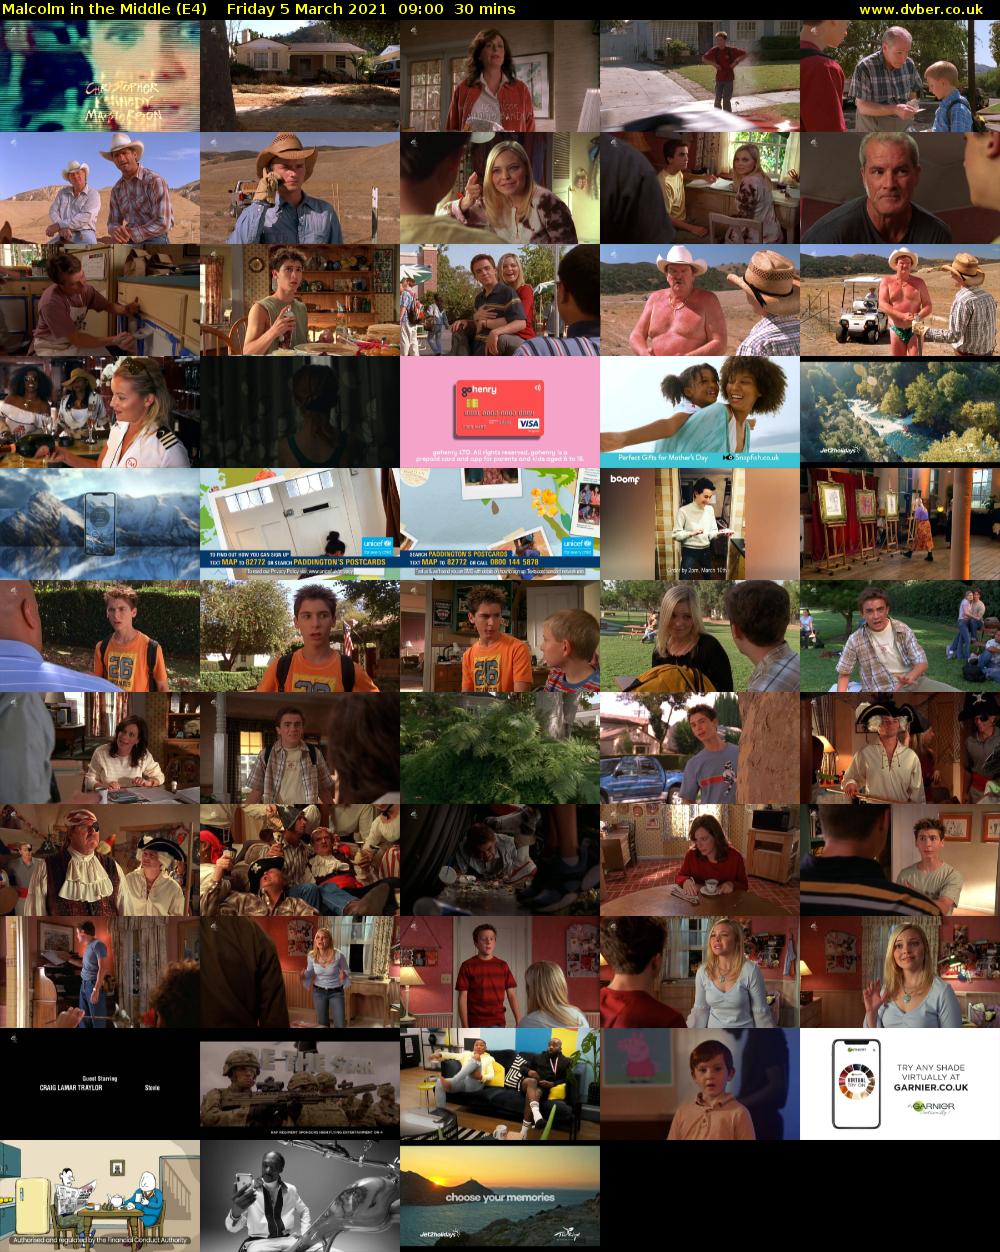 Malcolm in the Middle (E4) Friday 5 March 2021 09:00 - 09:30